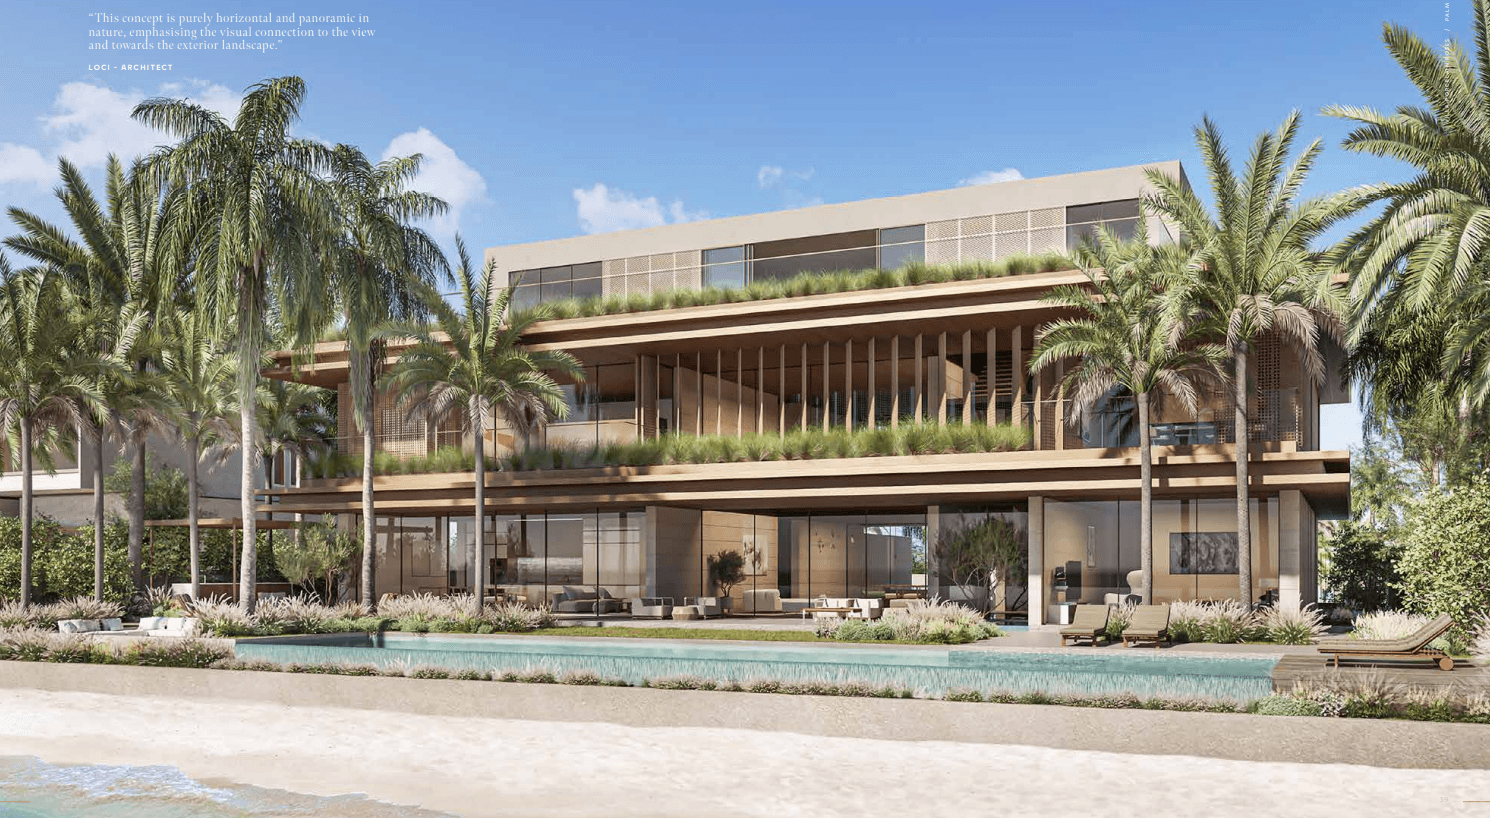 7-BEDROOM CORAL VILLAS AT PALM JEBEL ALI – NAKHEEL'S NEWEST ICON OF OPULENCE WITH OFFICE, ROOF LOUNGE, AND PANORAMIC VISTAS